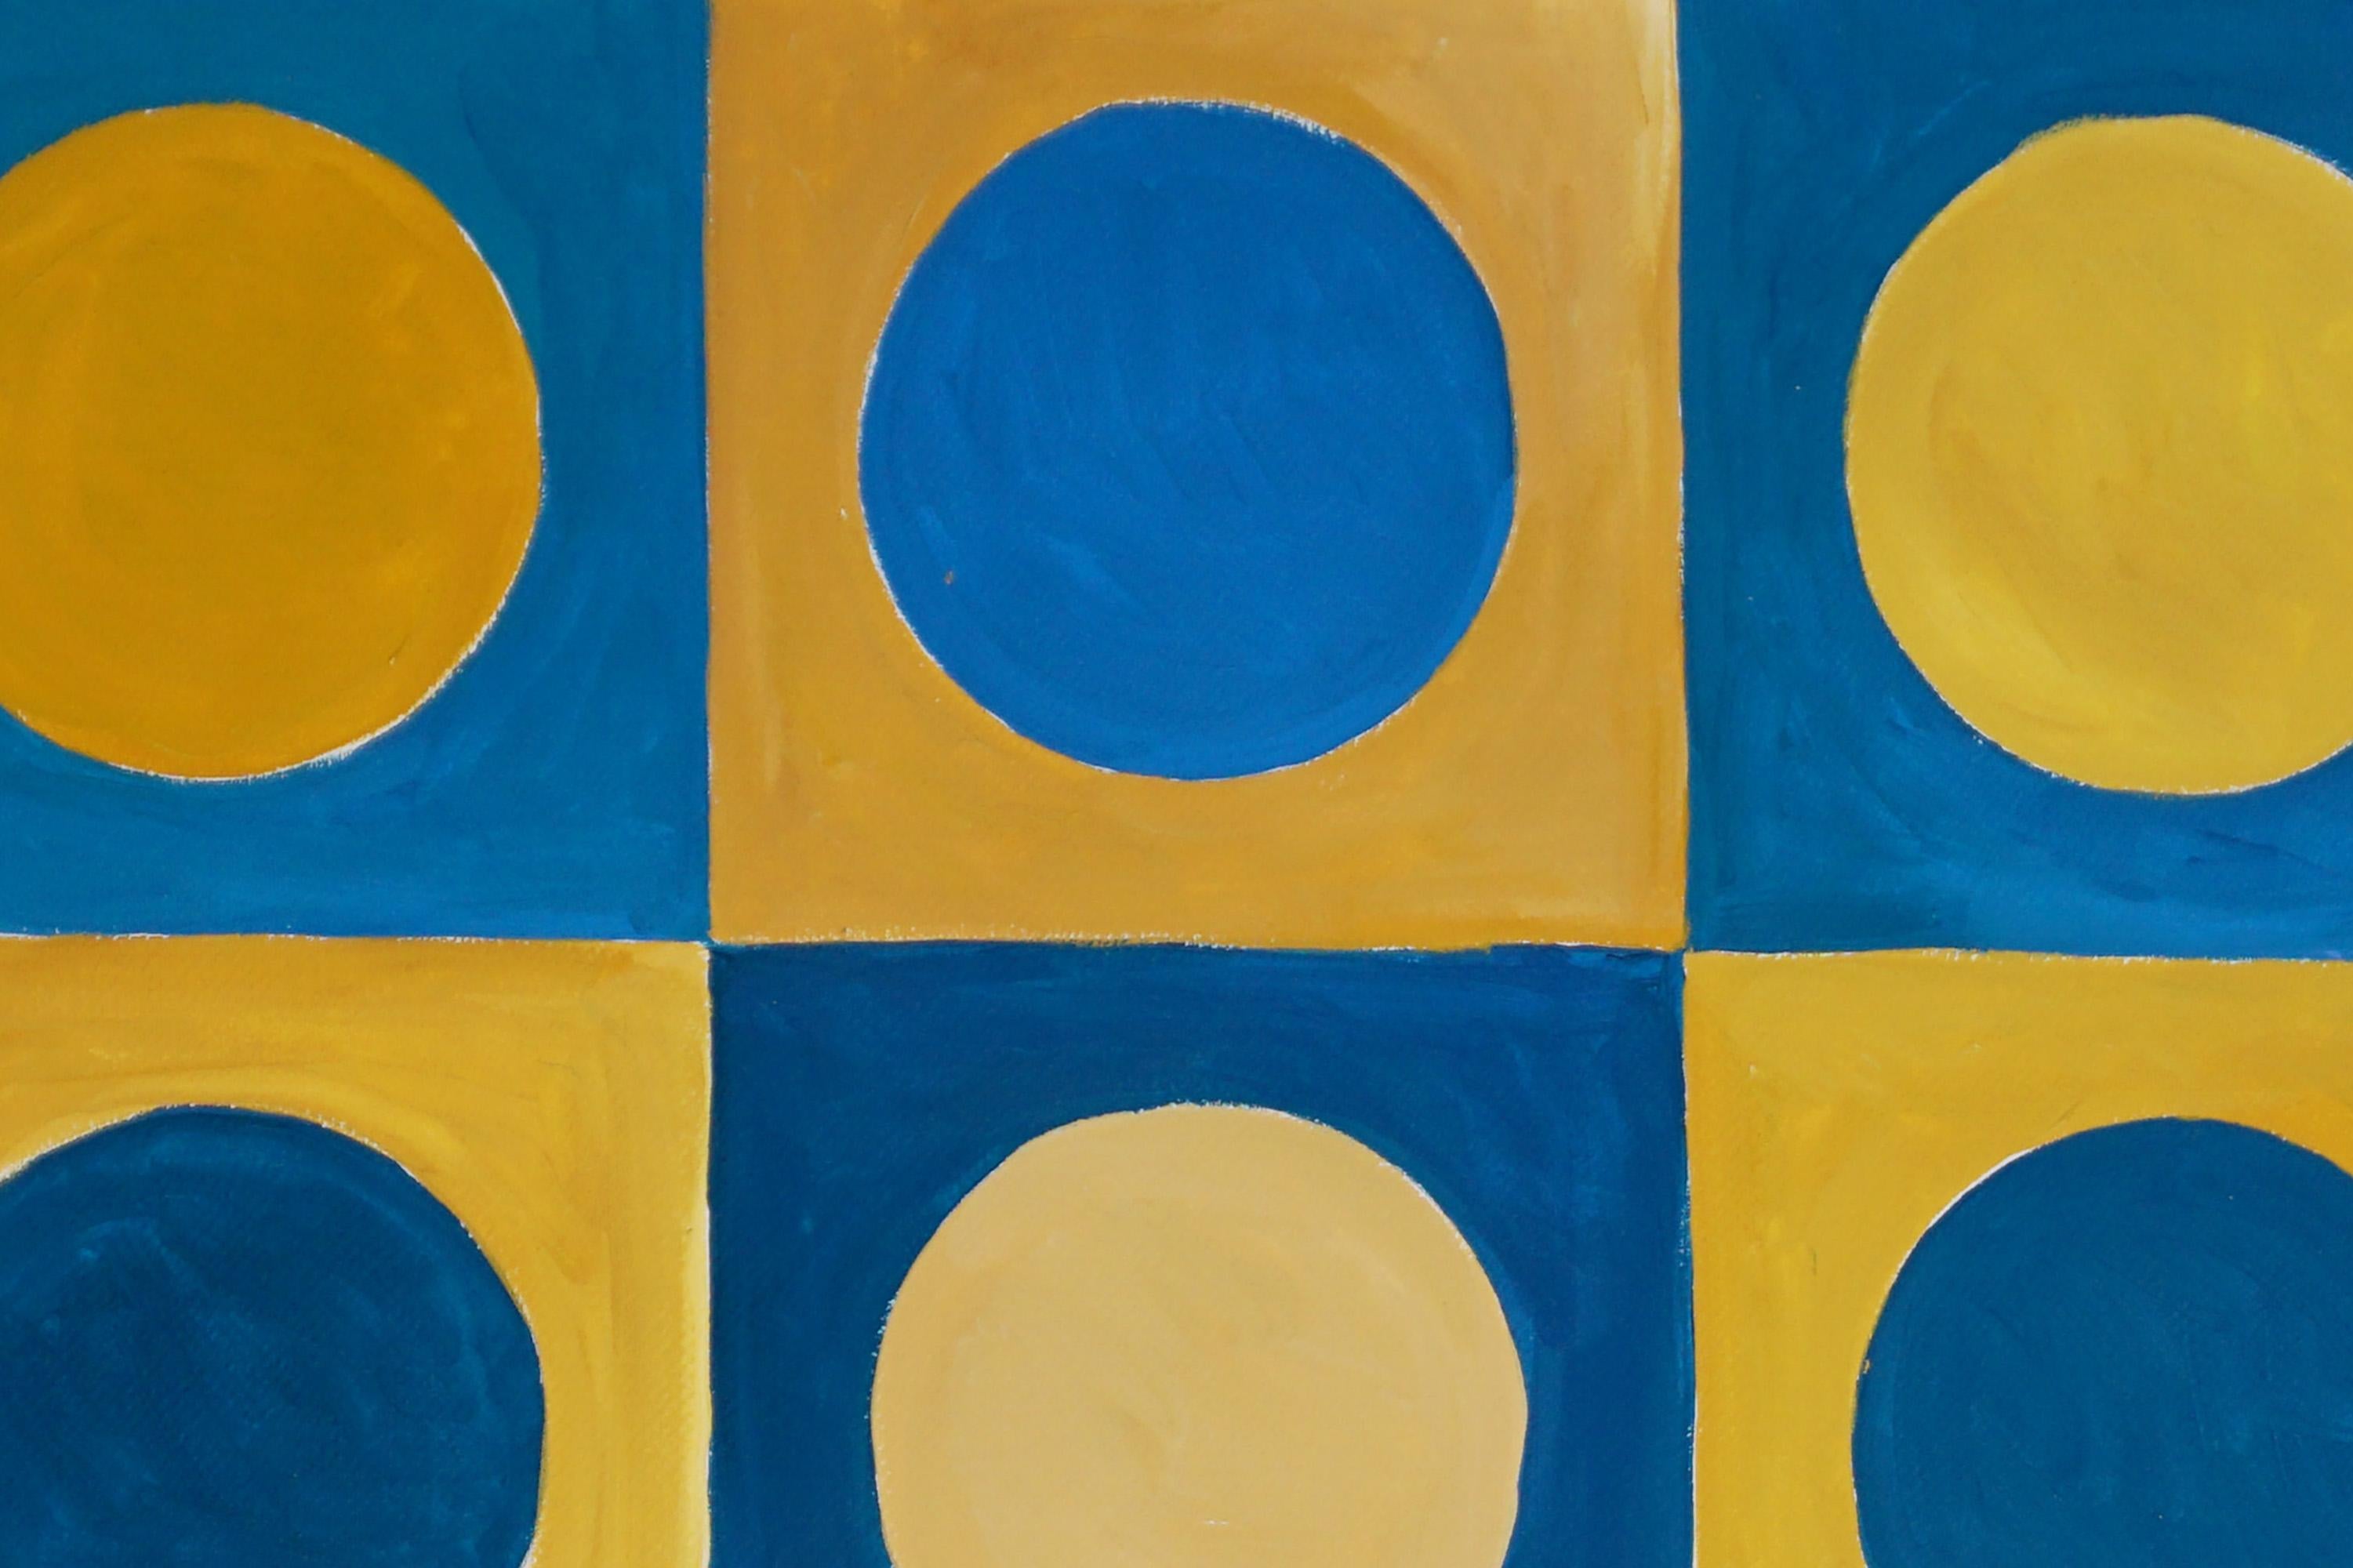 Pale Blue Dots, Primary Geometry Grid, Yellow and Blue, Complementary Tones  - Orange Abstract Painting by Natalia Roman